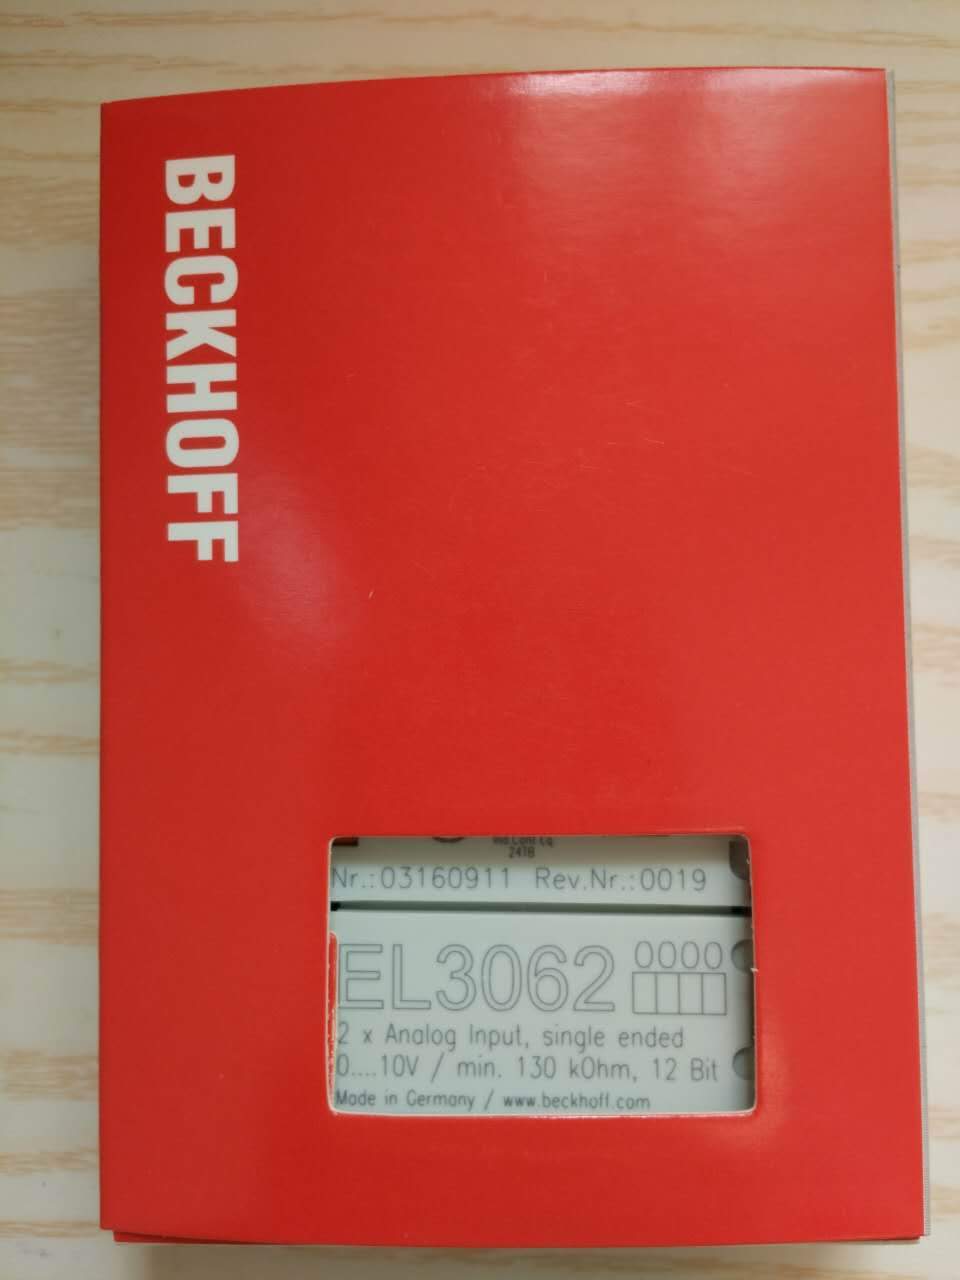 1PCS New Beckhoff EL3062 PLC Module Fast Shipping KOEED BECKHOFF, NEW